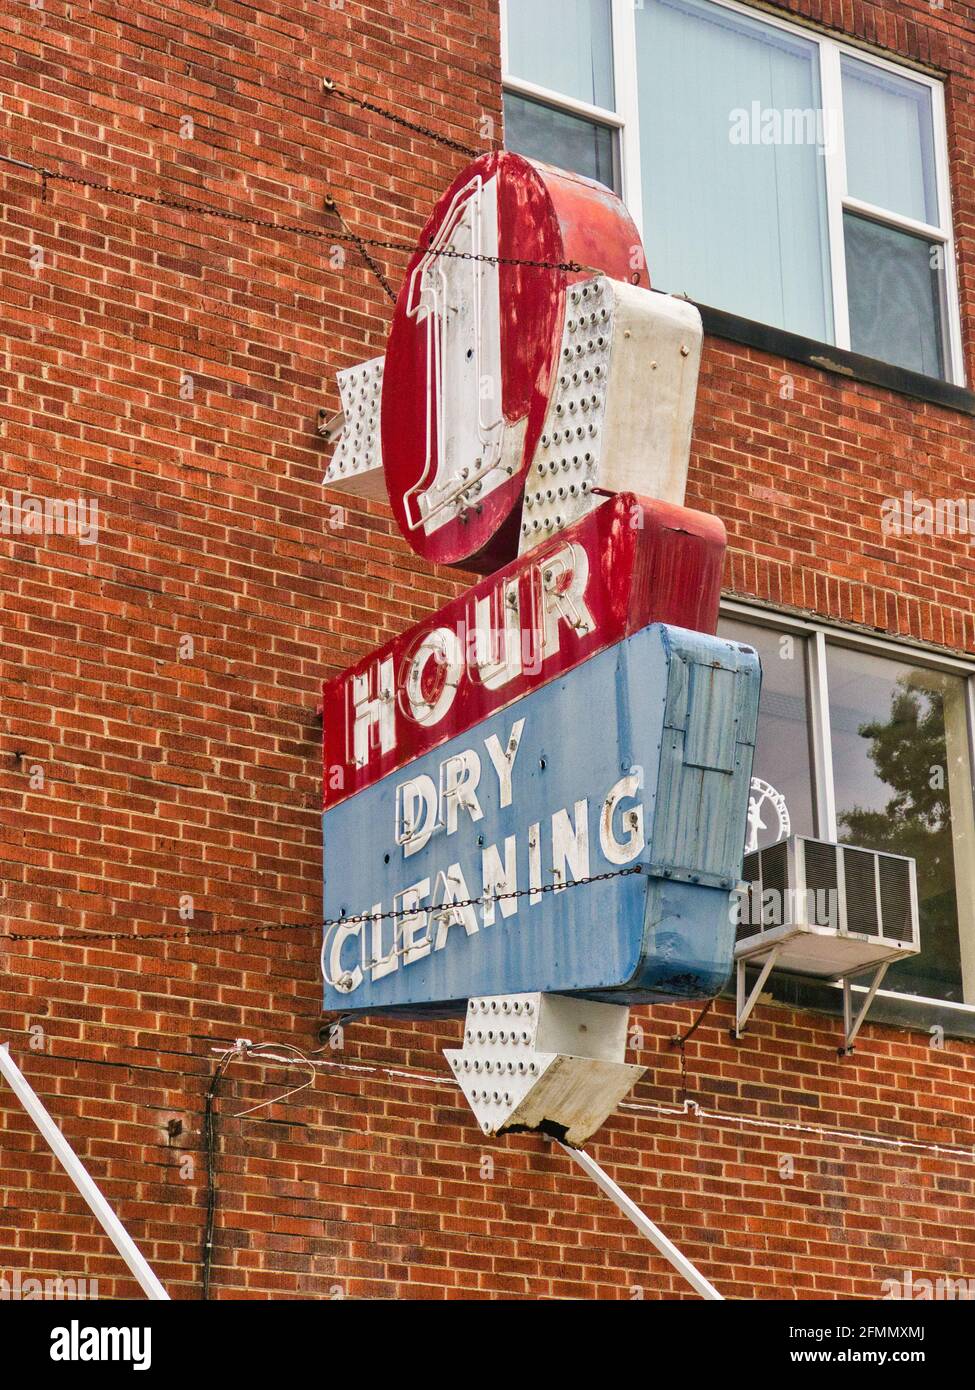 Old dry cleaning sign Stock Photo